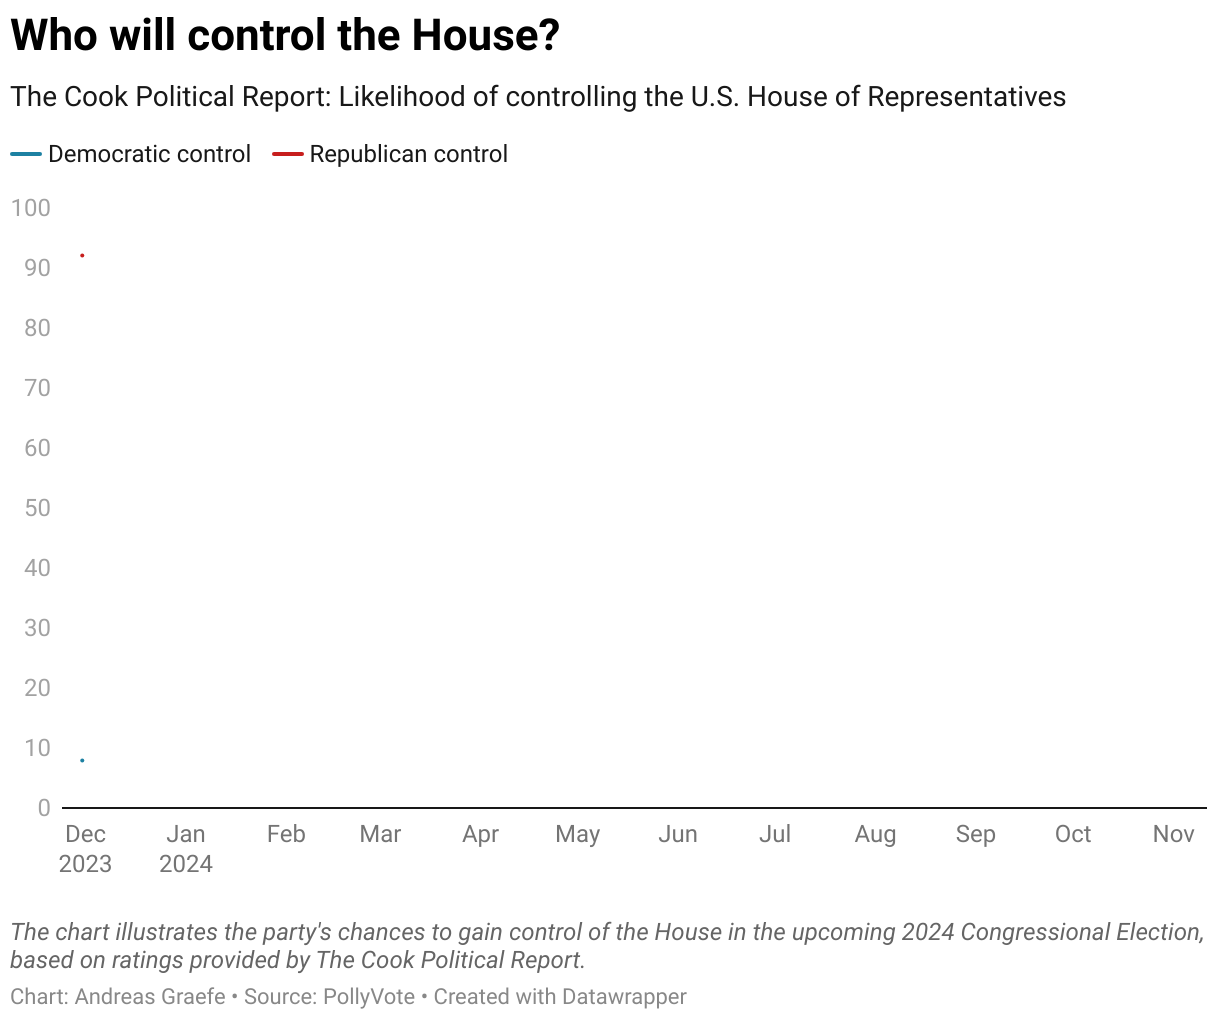 The chart illustrates the party's chances to gain control of the House in the upcoming 2024 Congressional Election, based on ratings provided by The Cook Political Report.